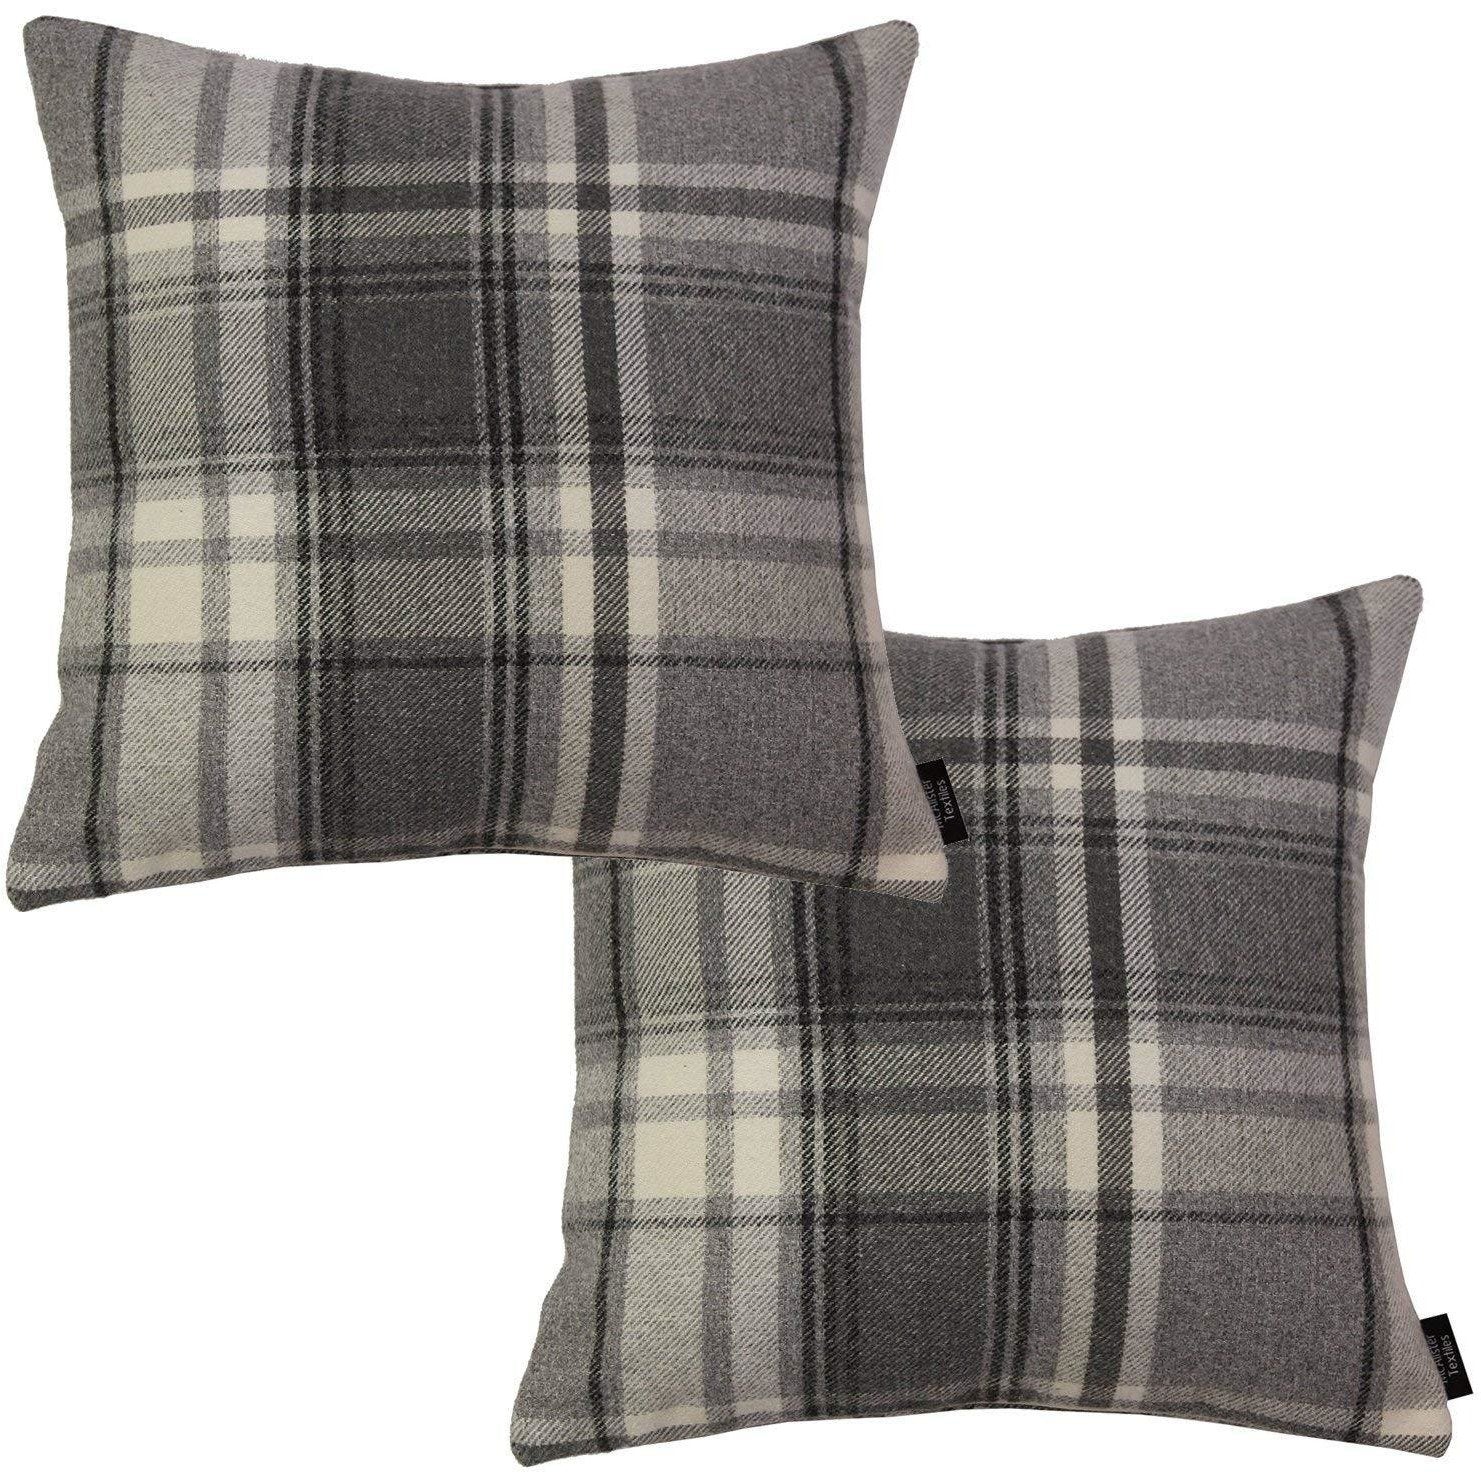 McAlister Textiles Heritage Charcoal Grey Tartan 43cm x 43cm Cushion Sets Cushions and Covers Cushion Covers Set of 2 